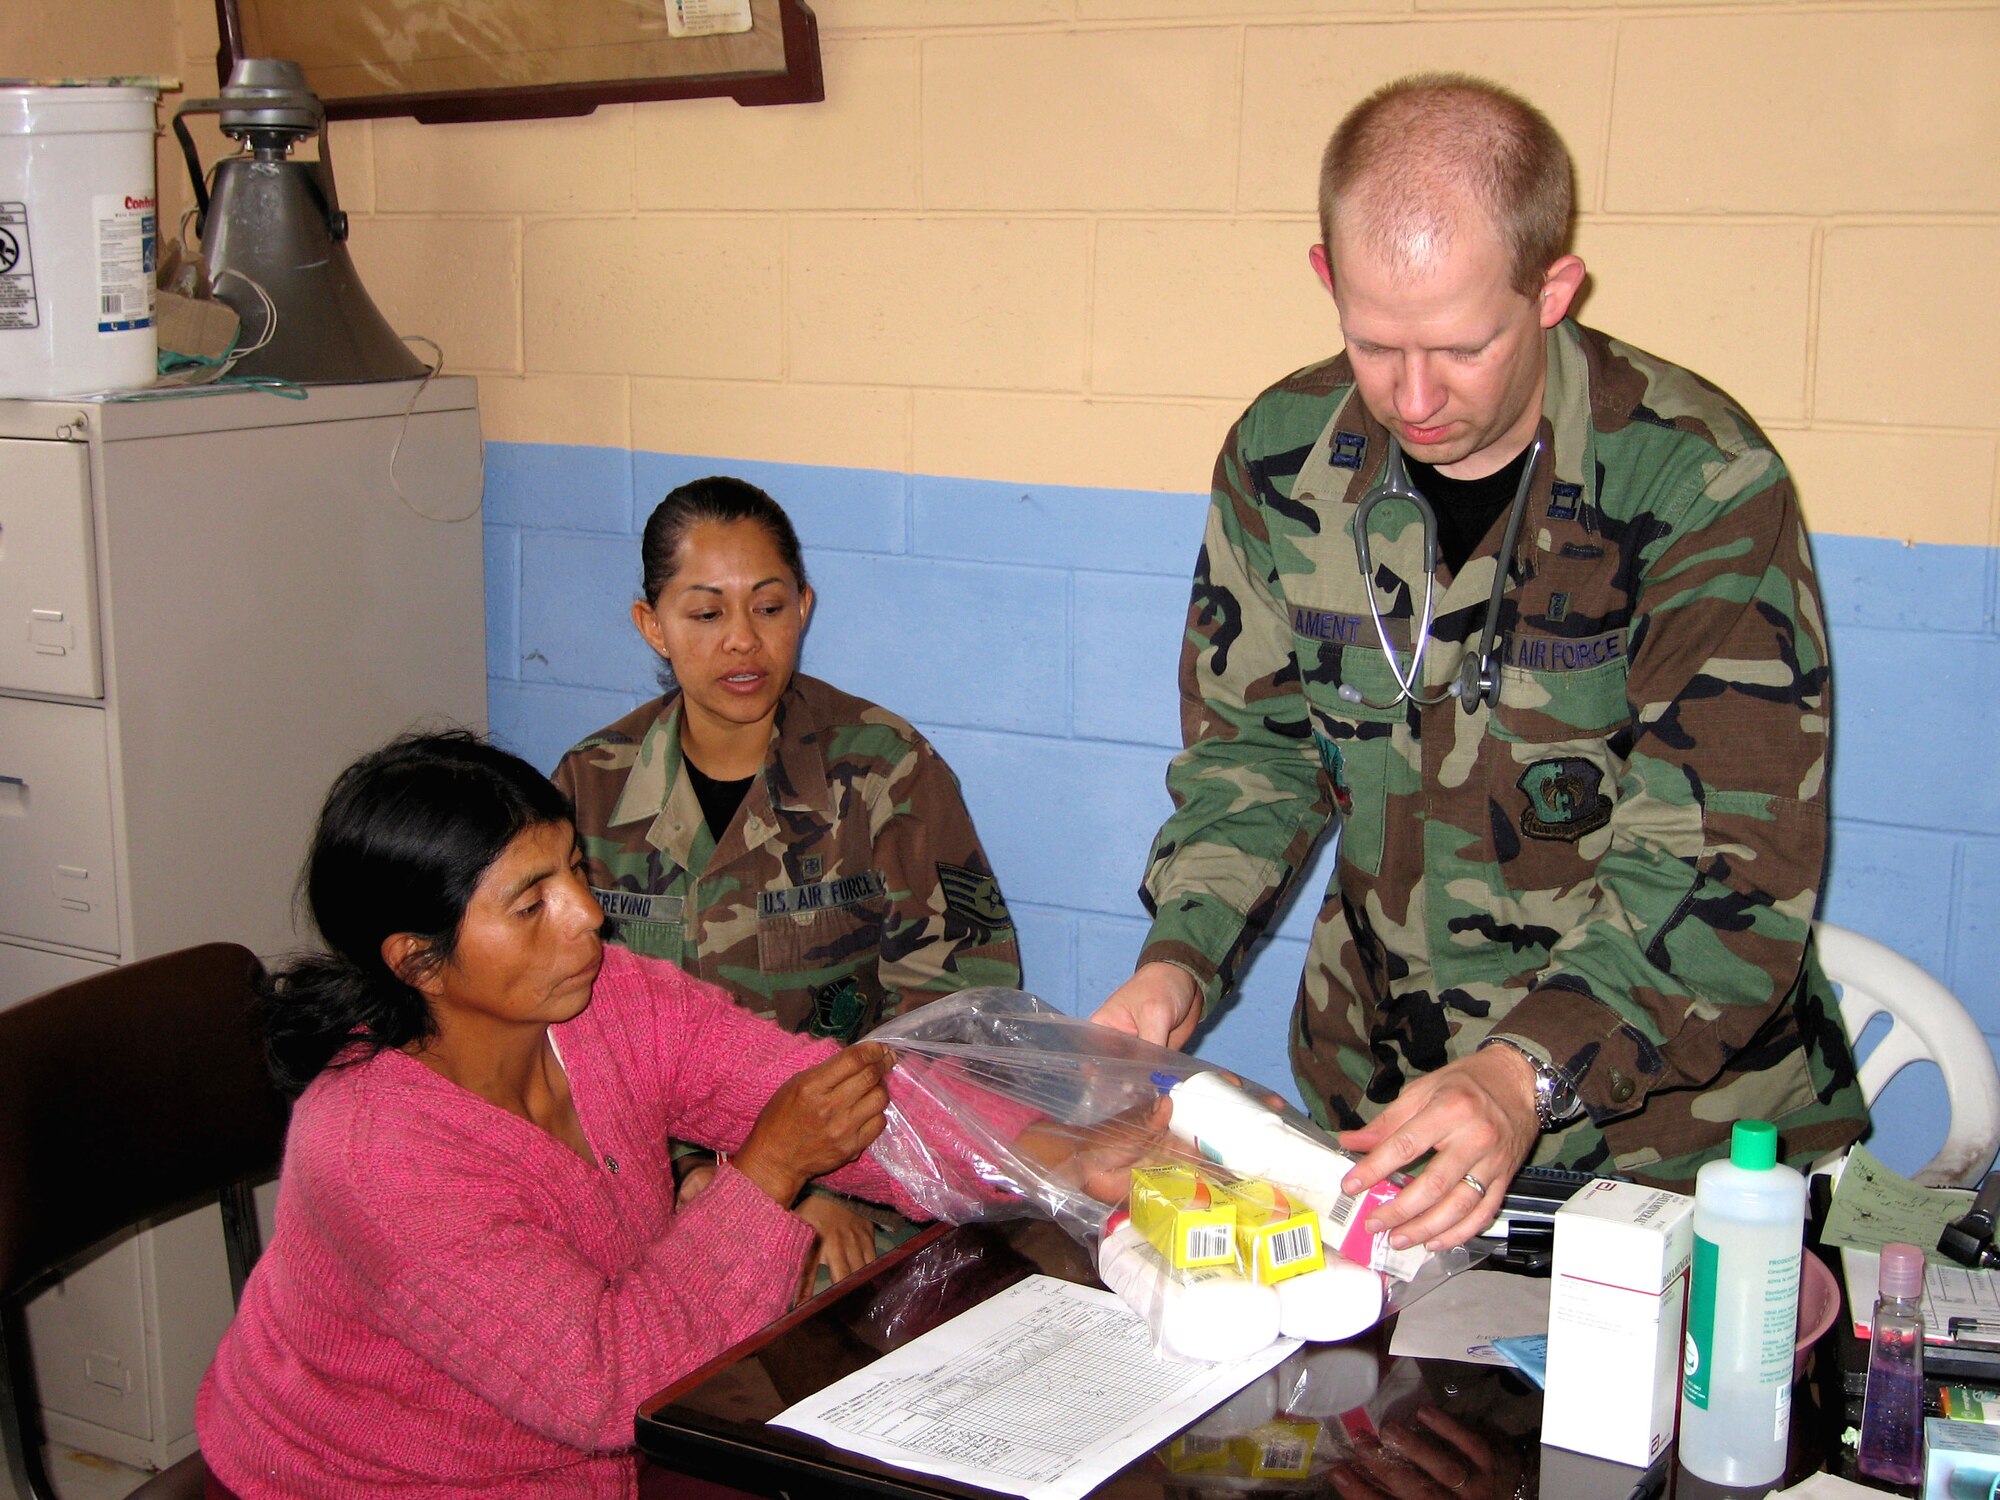 Capt. (Dr.) Aaron Ament (right) and Staff Sgt. Leticia Trevino provide medication to a patient in Pinepe, Ecuador, for symptoms caused by the Tungurahua volcano eruption Aug. 16. Captain Ament is a family practice physician from Minot Air Force Base, N.D. Sergeant Trevino is a translator and lab technician from Lackland AFB, Texas. (U.S. Air Force photo/Capt. Nancy Kuck)